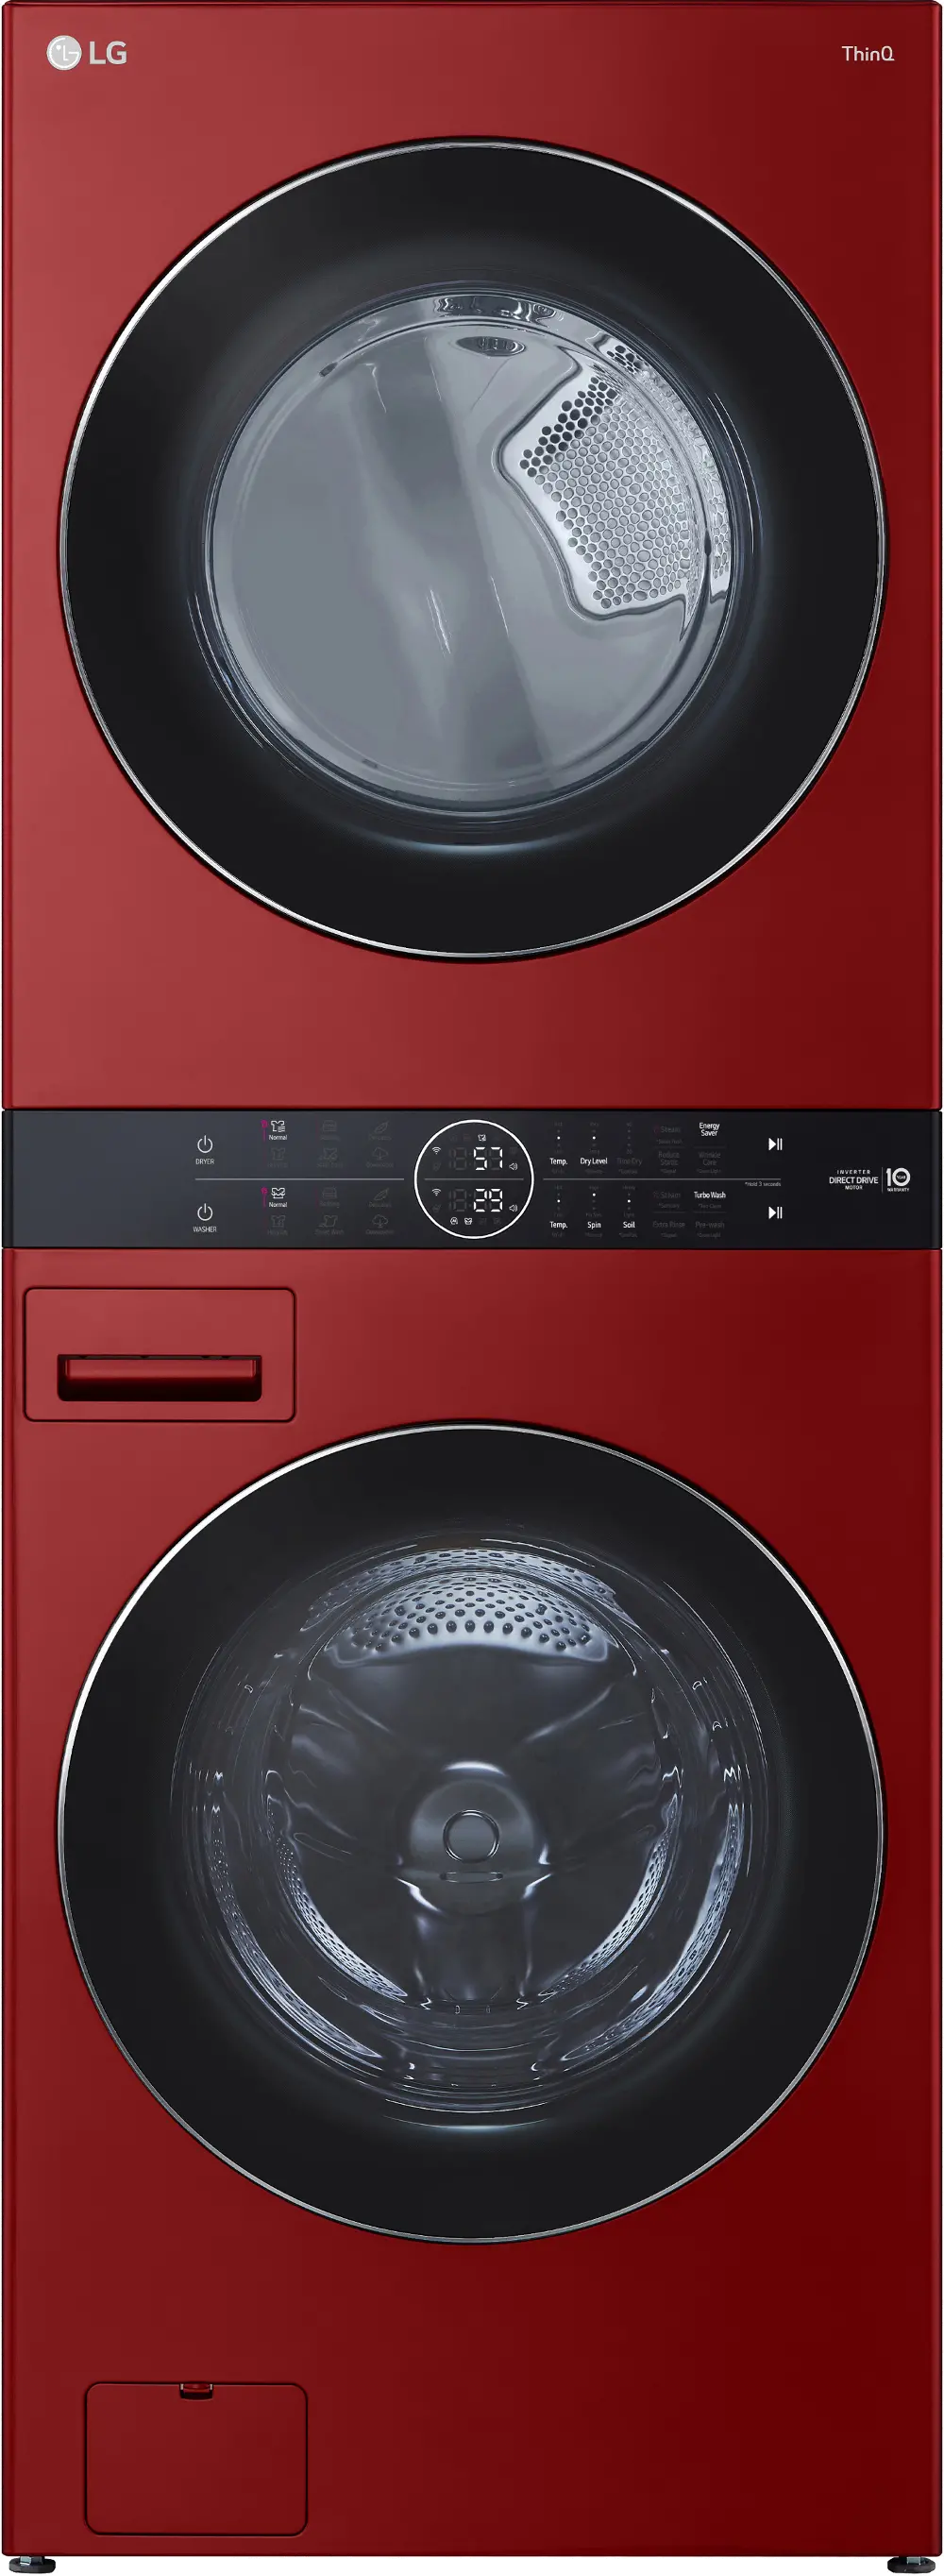 WKEX200HRA LG WashTower Electric Washer and Dryer Set - Candy Apple Red-1